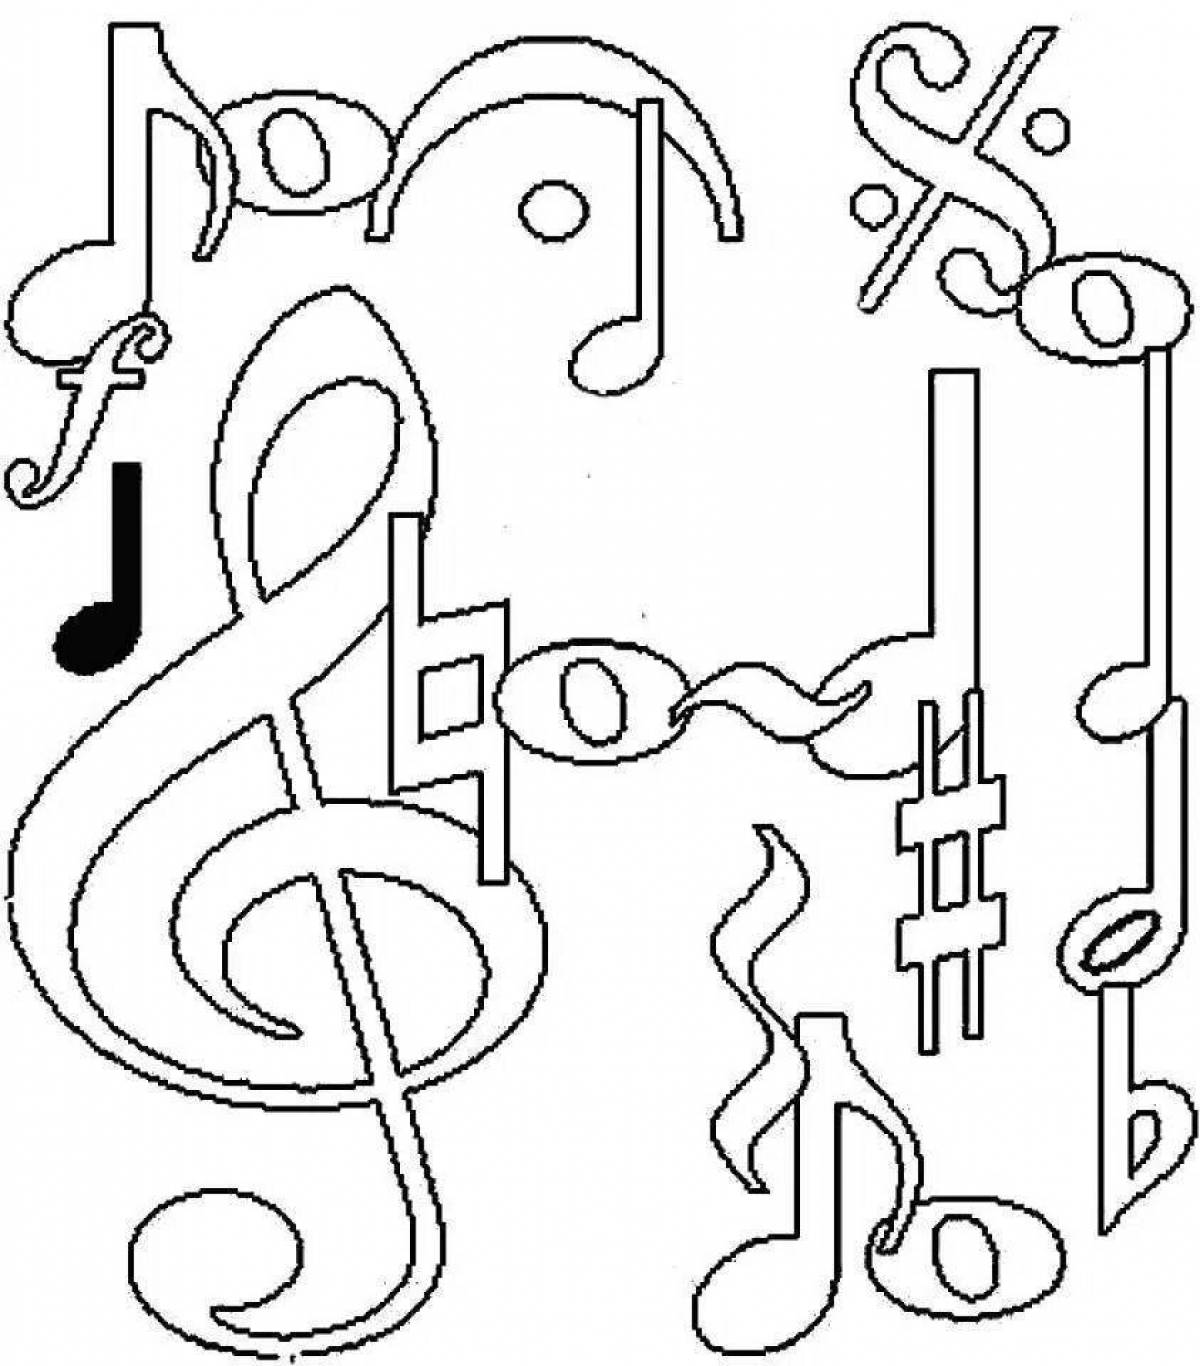 Coloring sheet stimulated notes